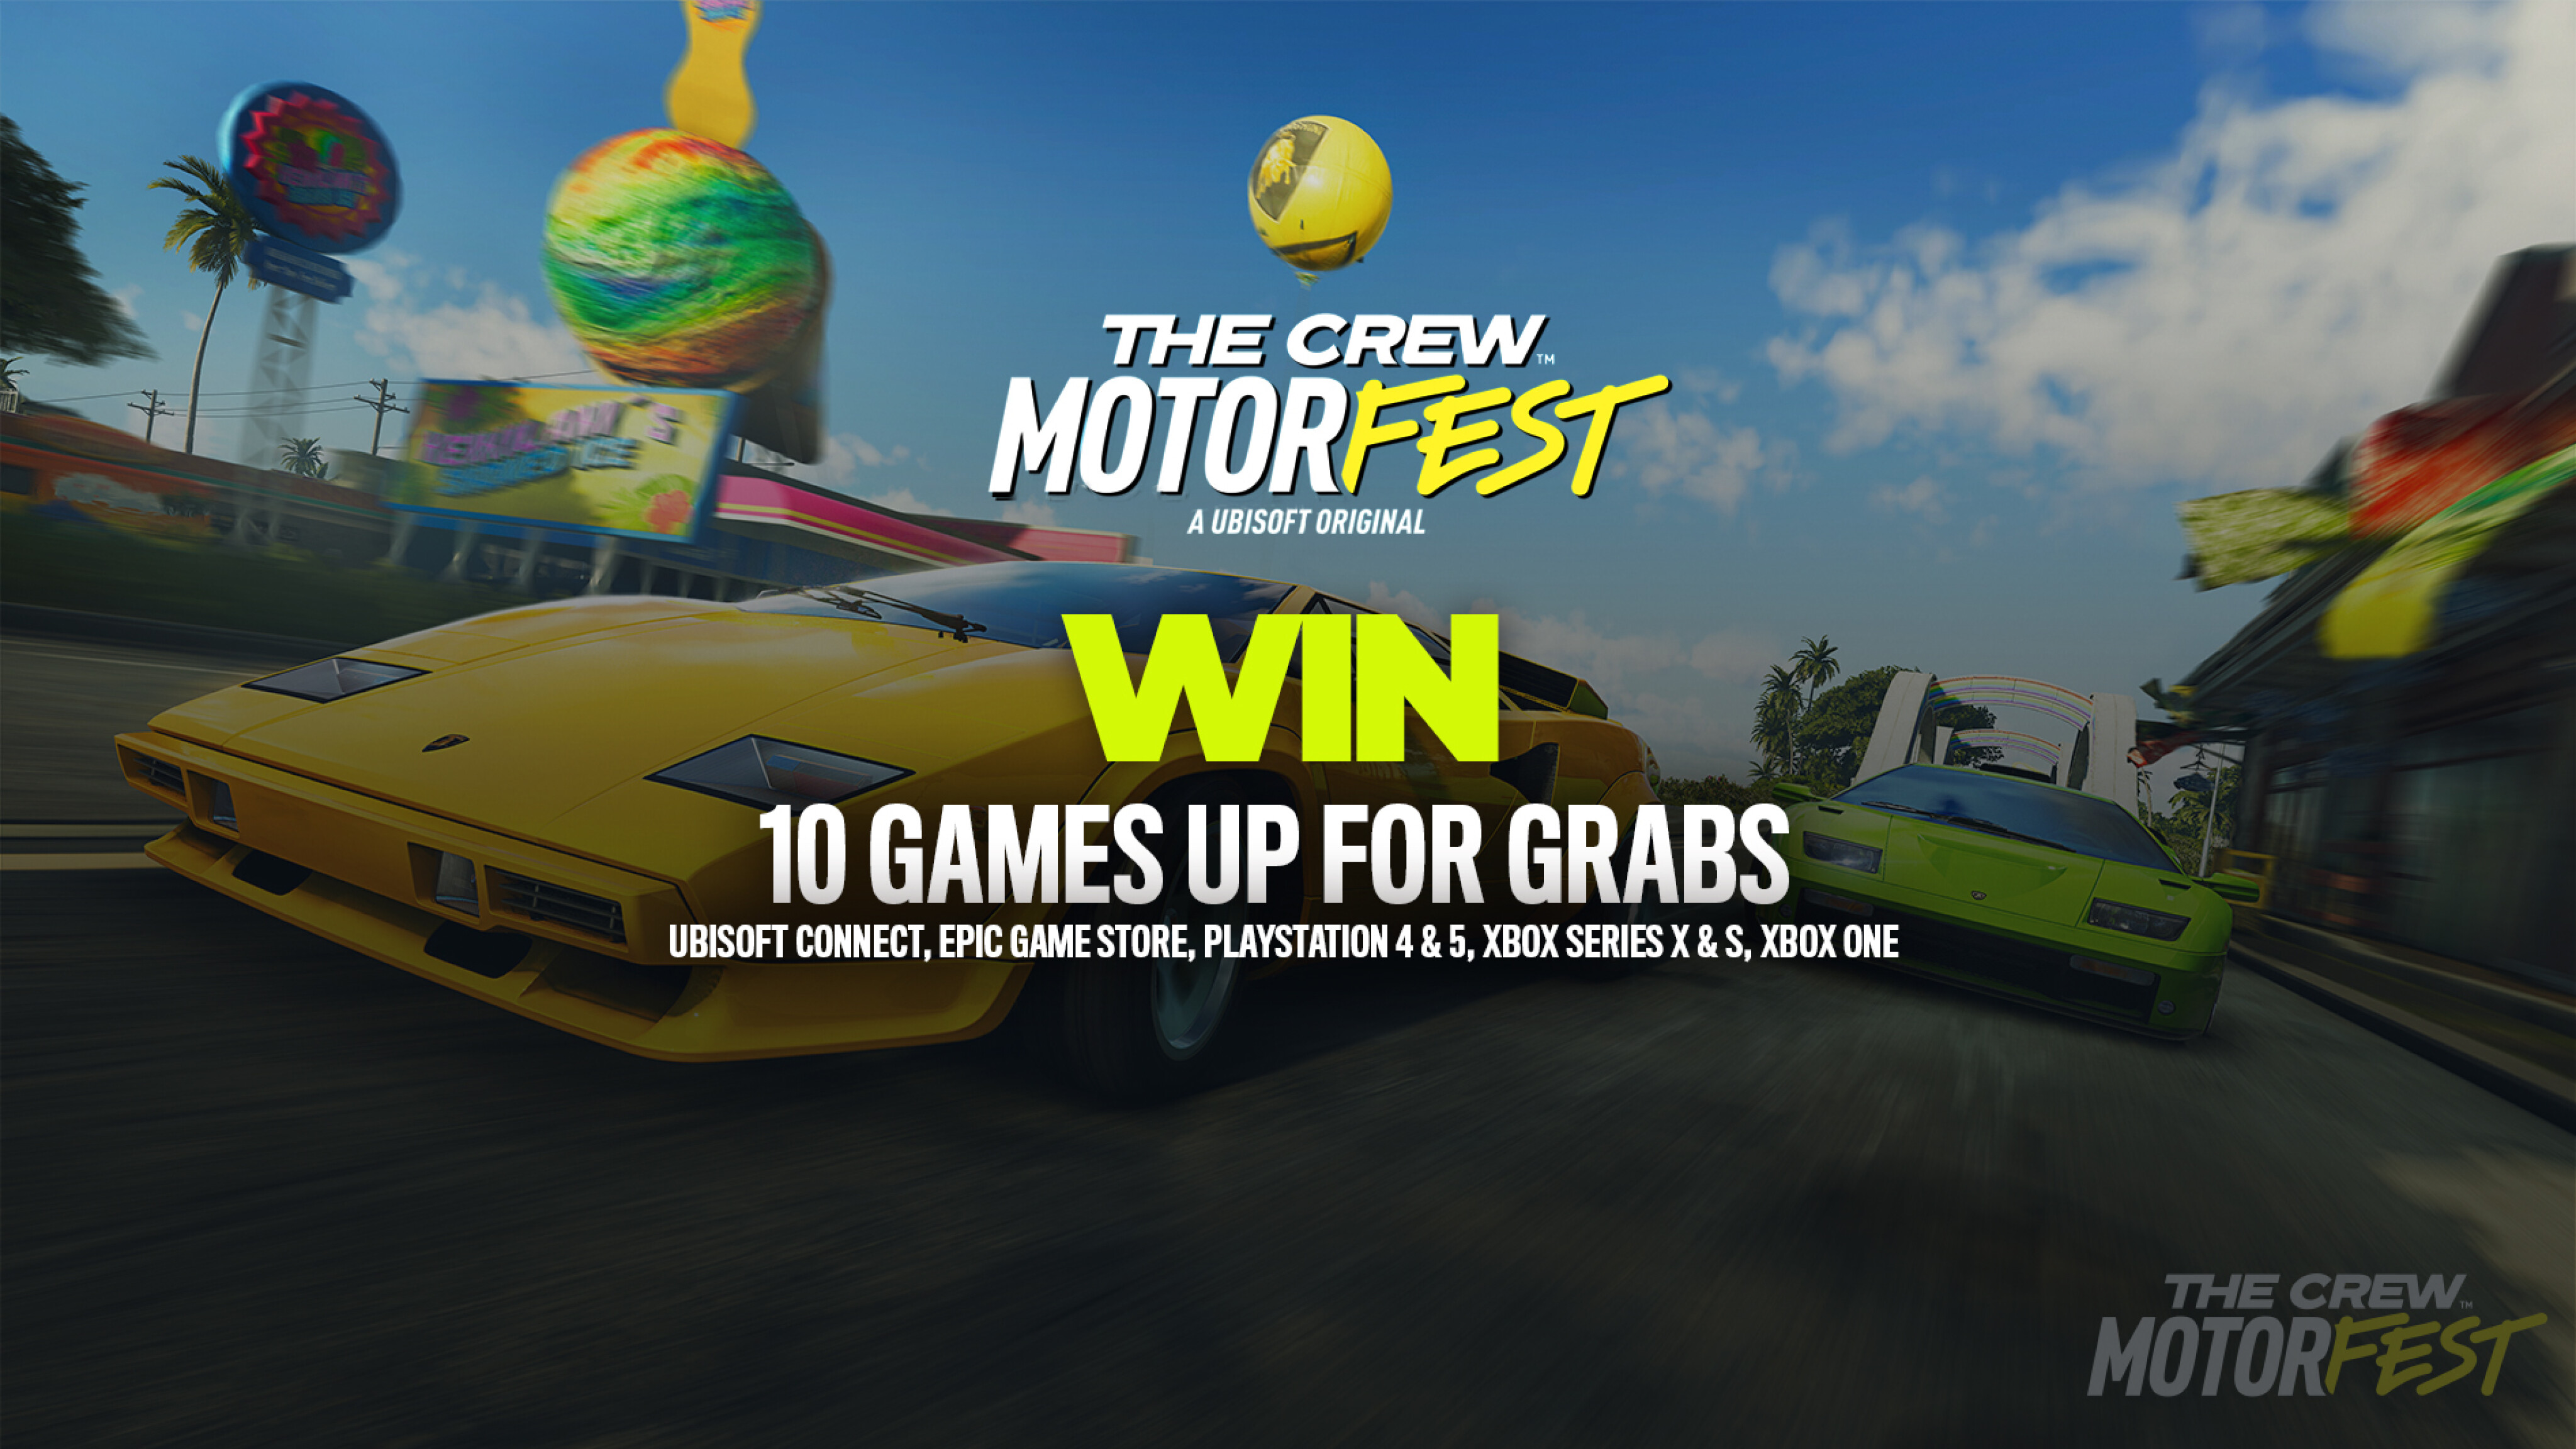 PREVIEW] - The Crew Motorfest, Page 3